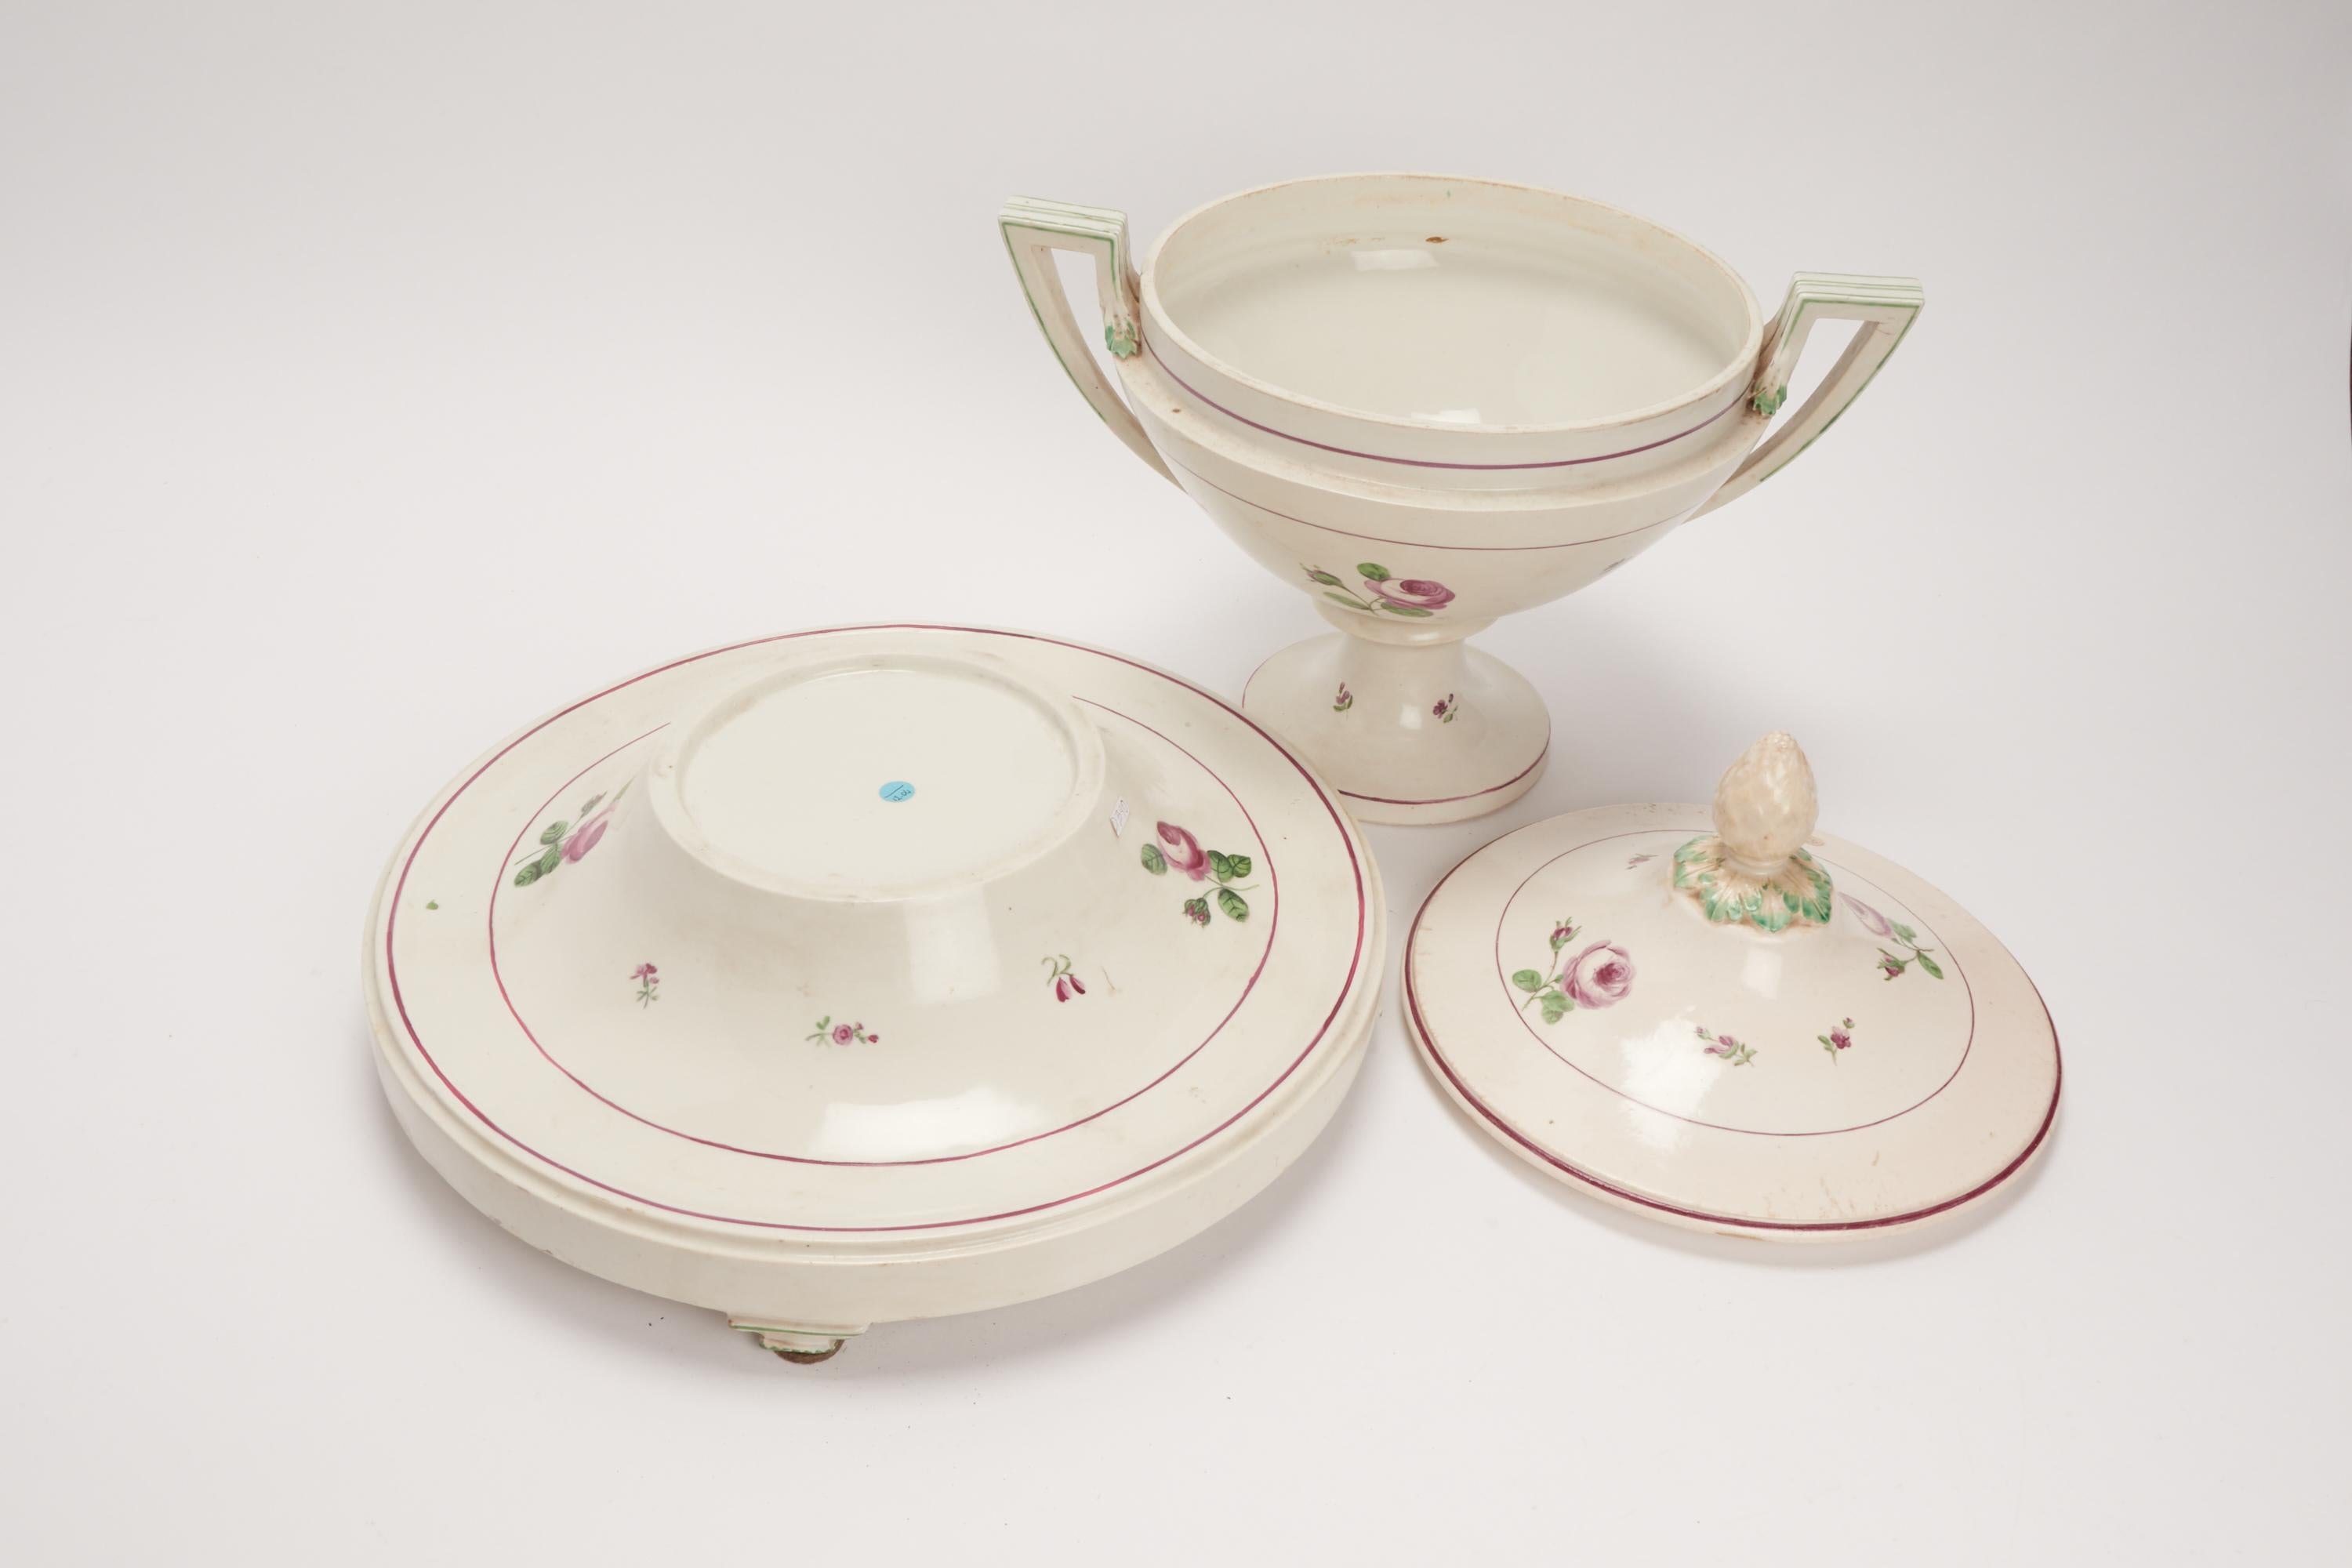 Pair of Soup Terrines Old Vienna Porcelain Manufacture, Austria 1770 For Sale 3